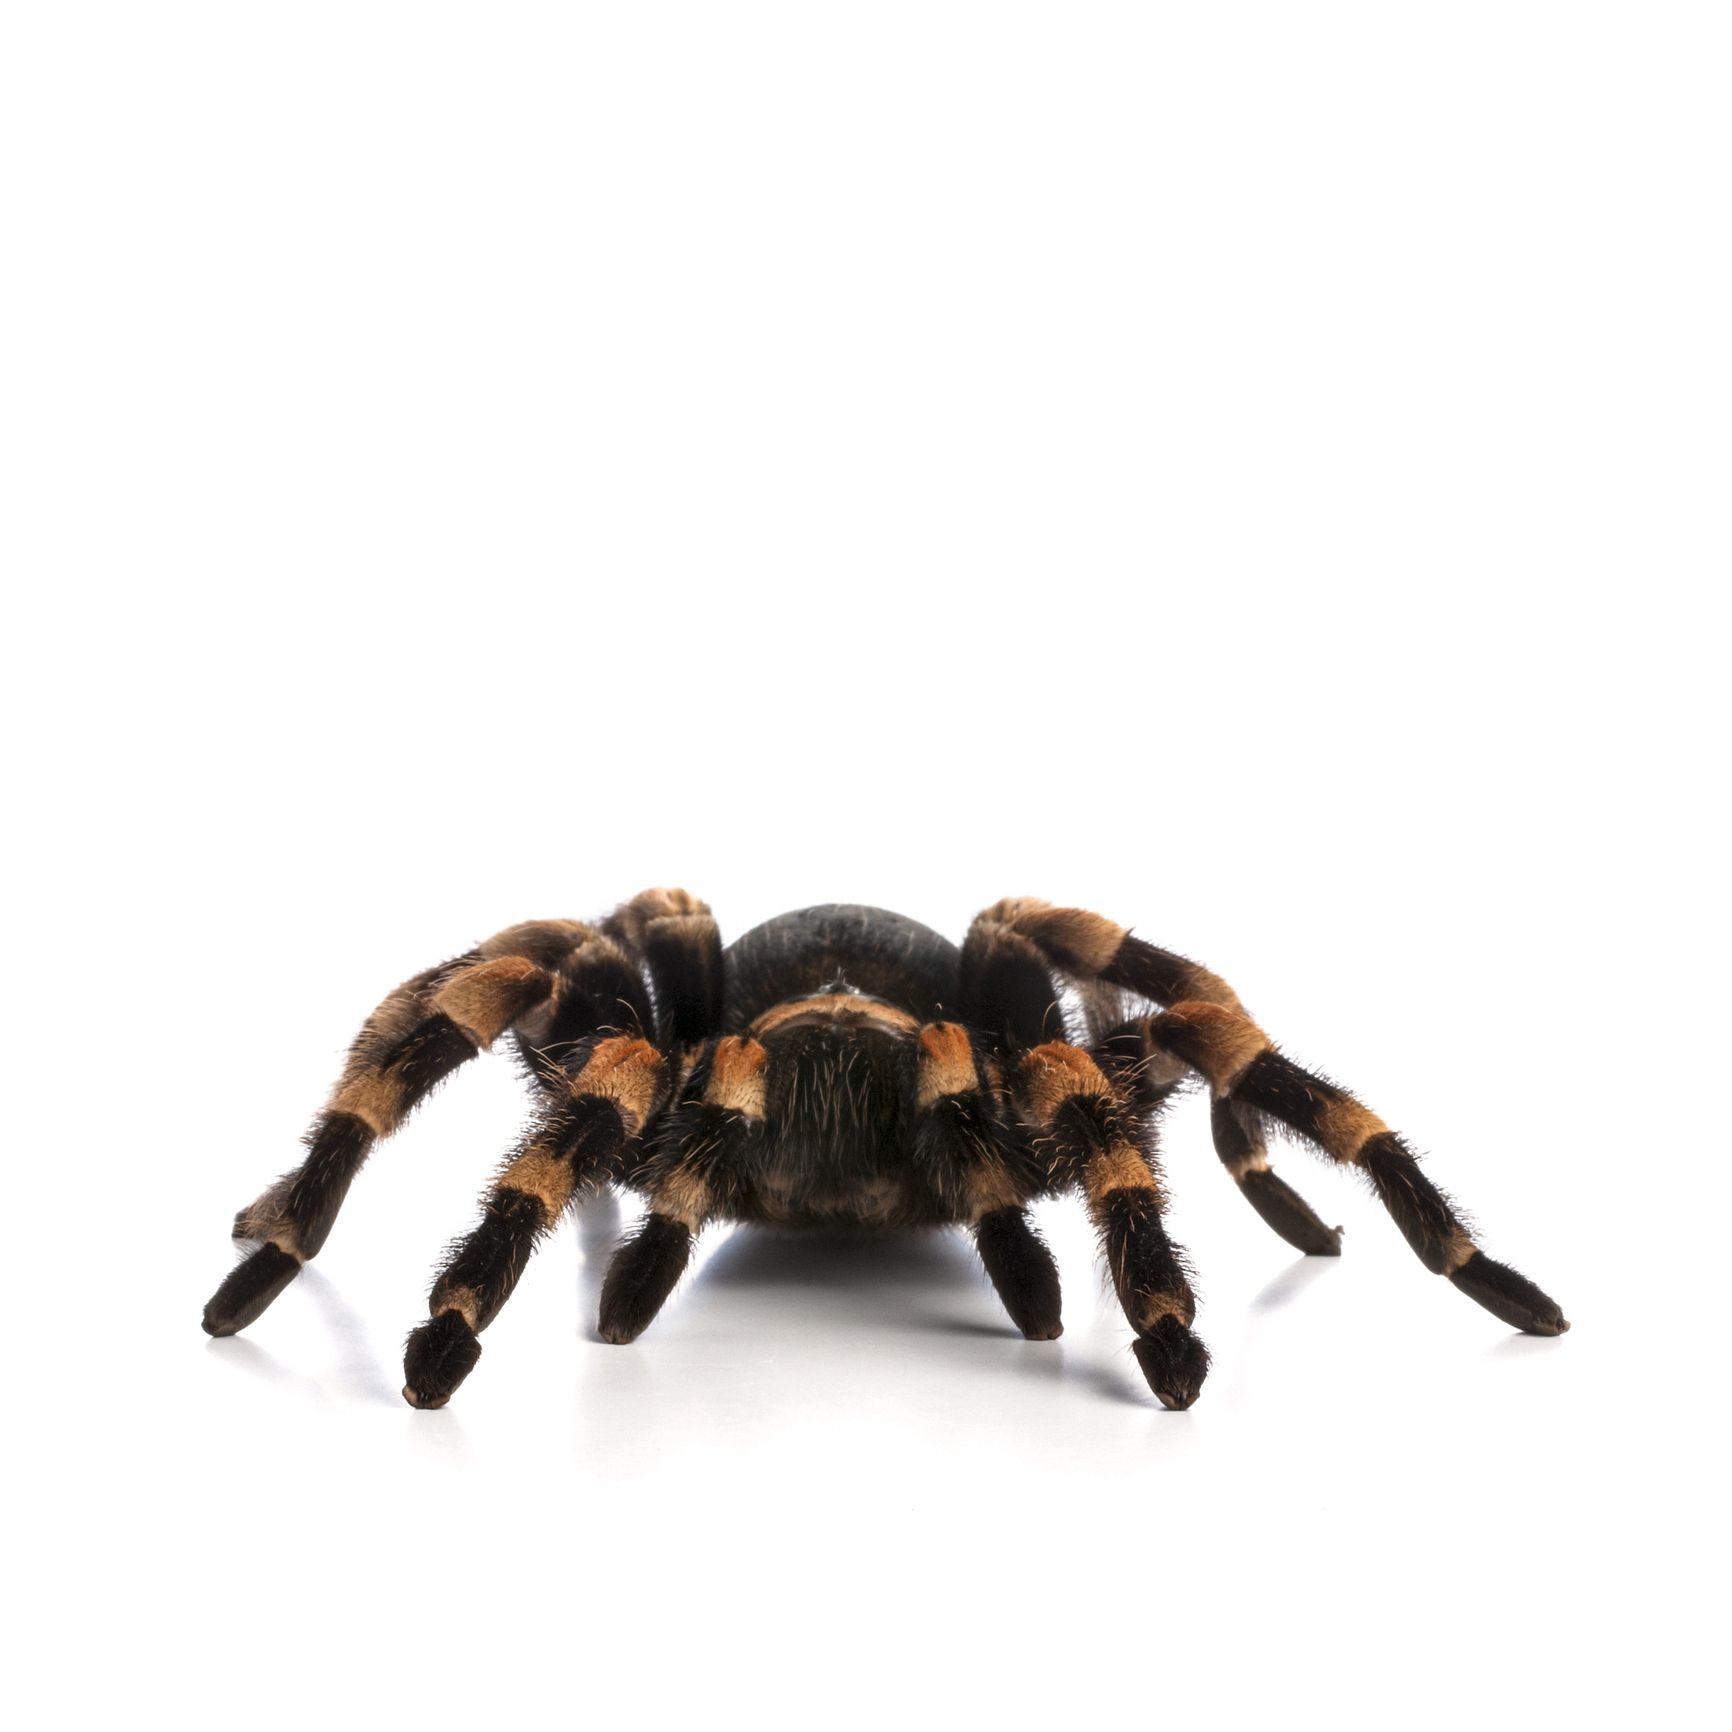 Mexican redknee tarantula on a white background